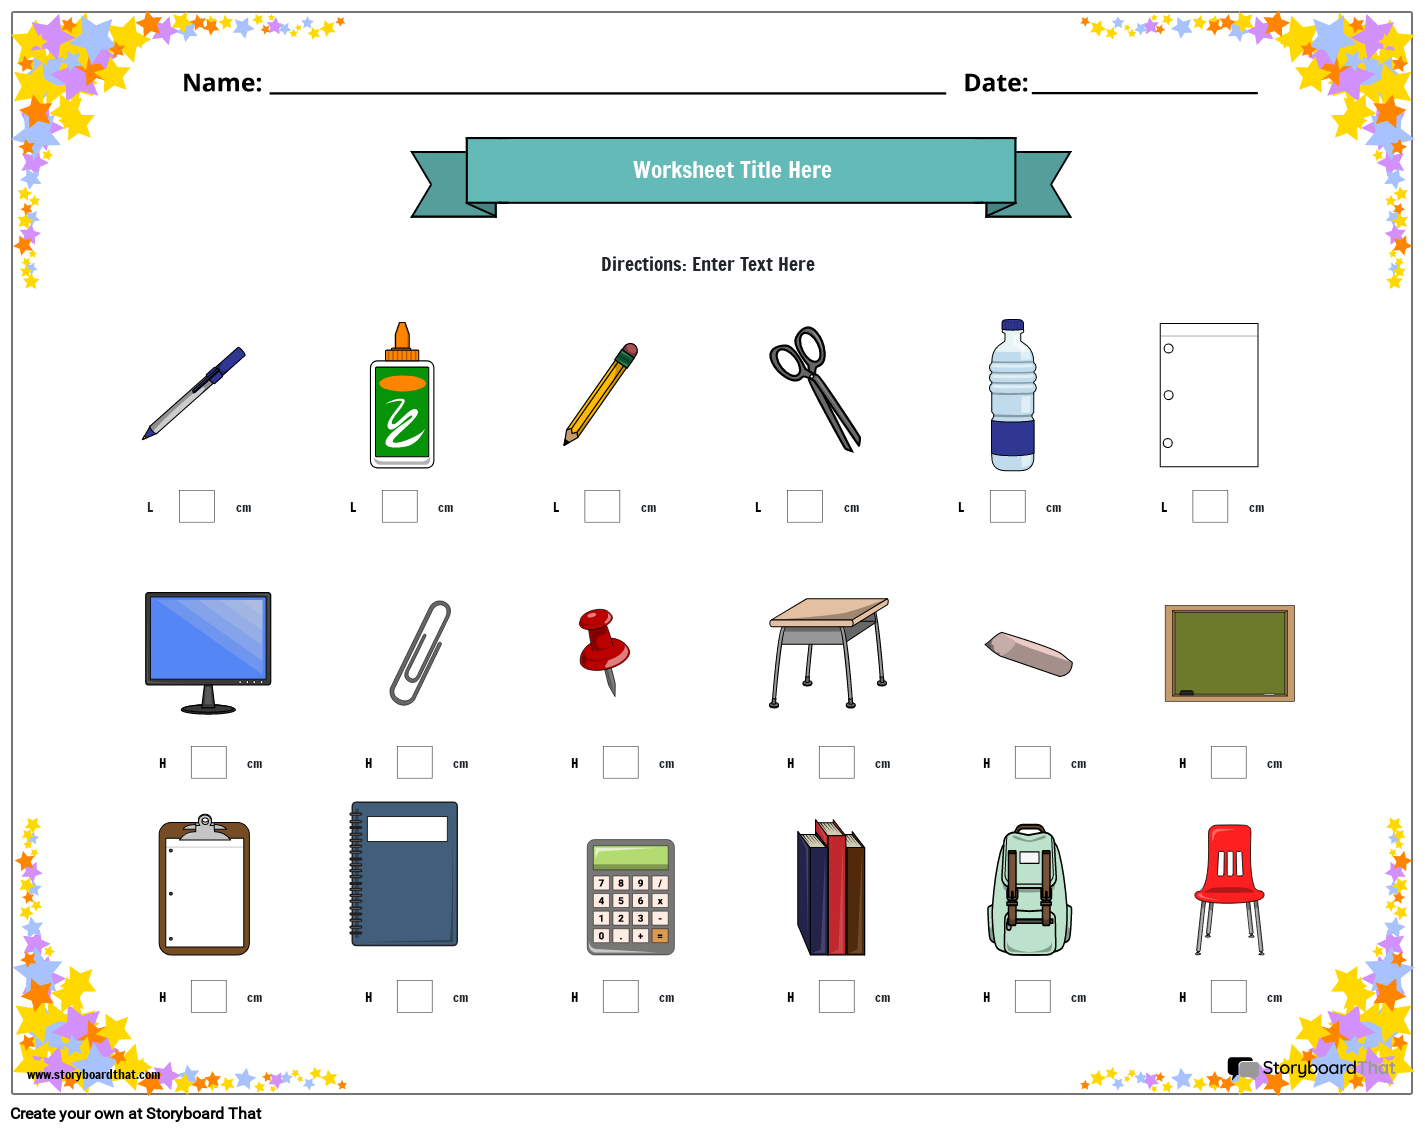 Measurement of objects worksheet with star border